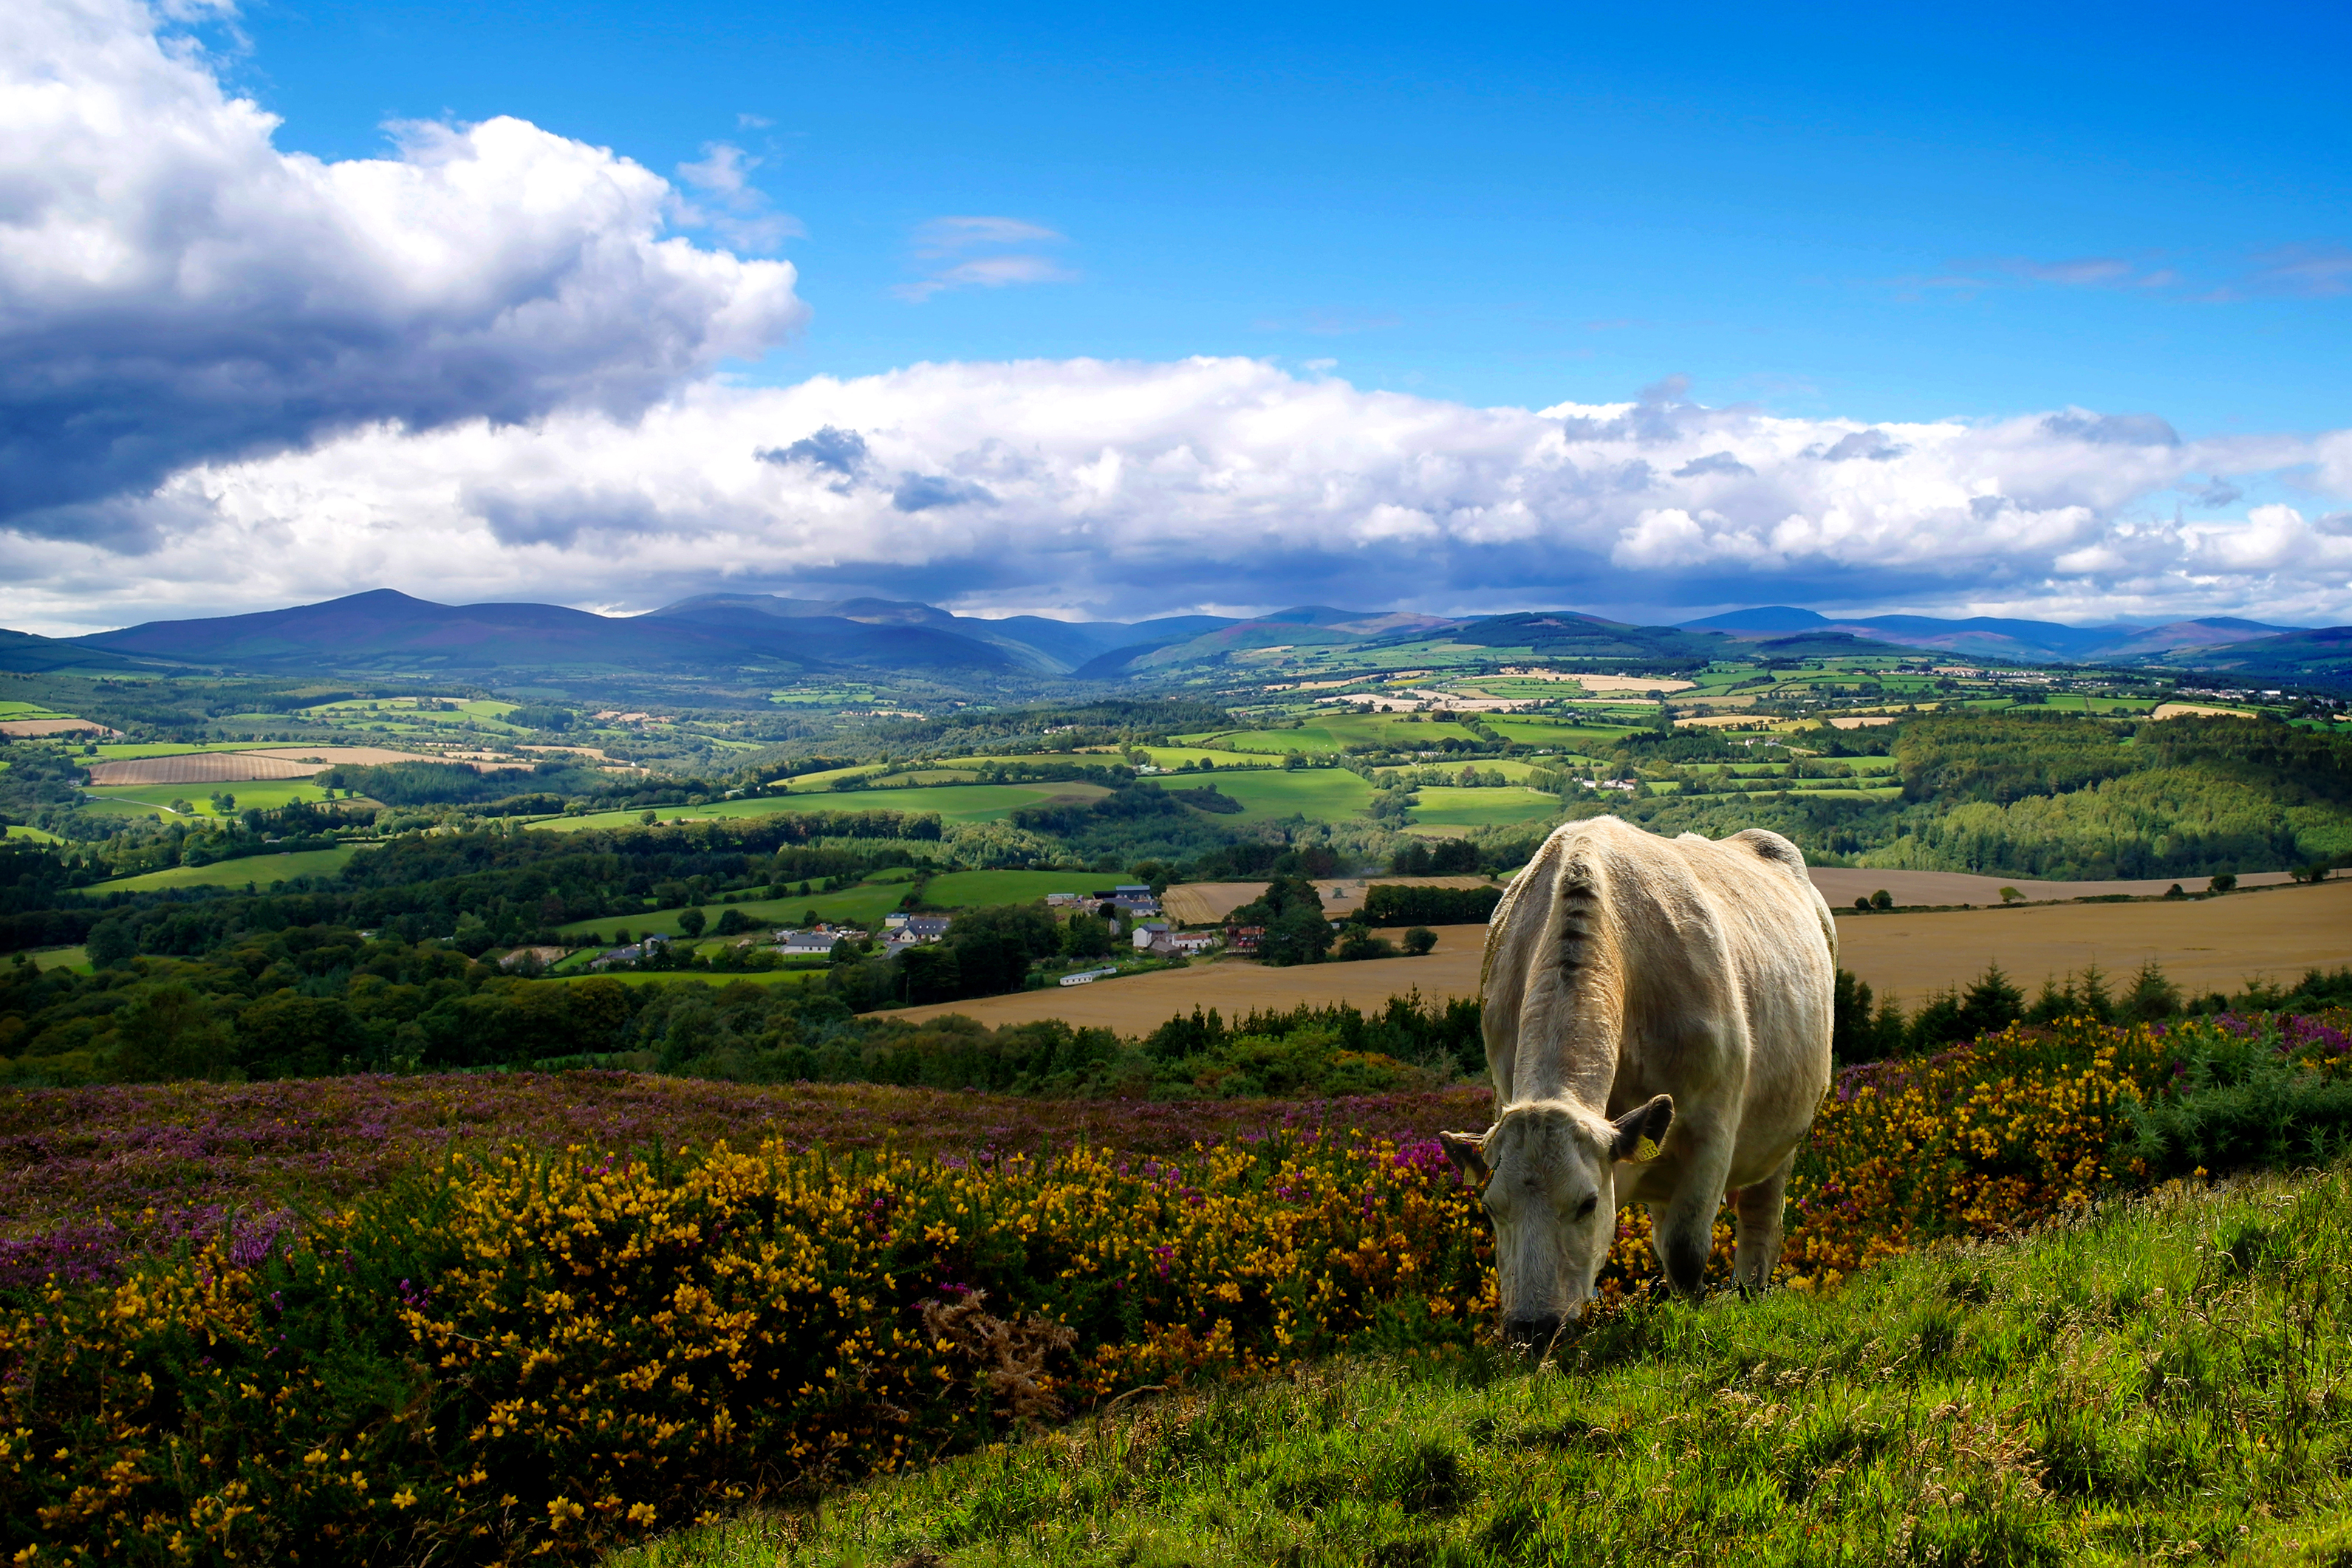 View of Avoca, hills and fields in distance, cow grazing in foreground copyright Susanna Braswell